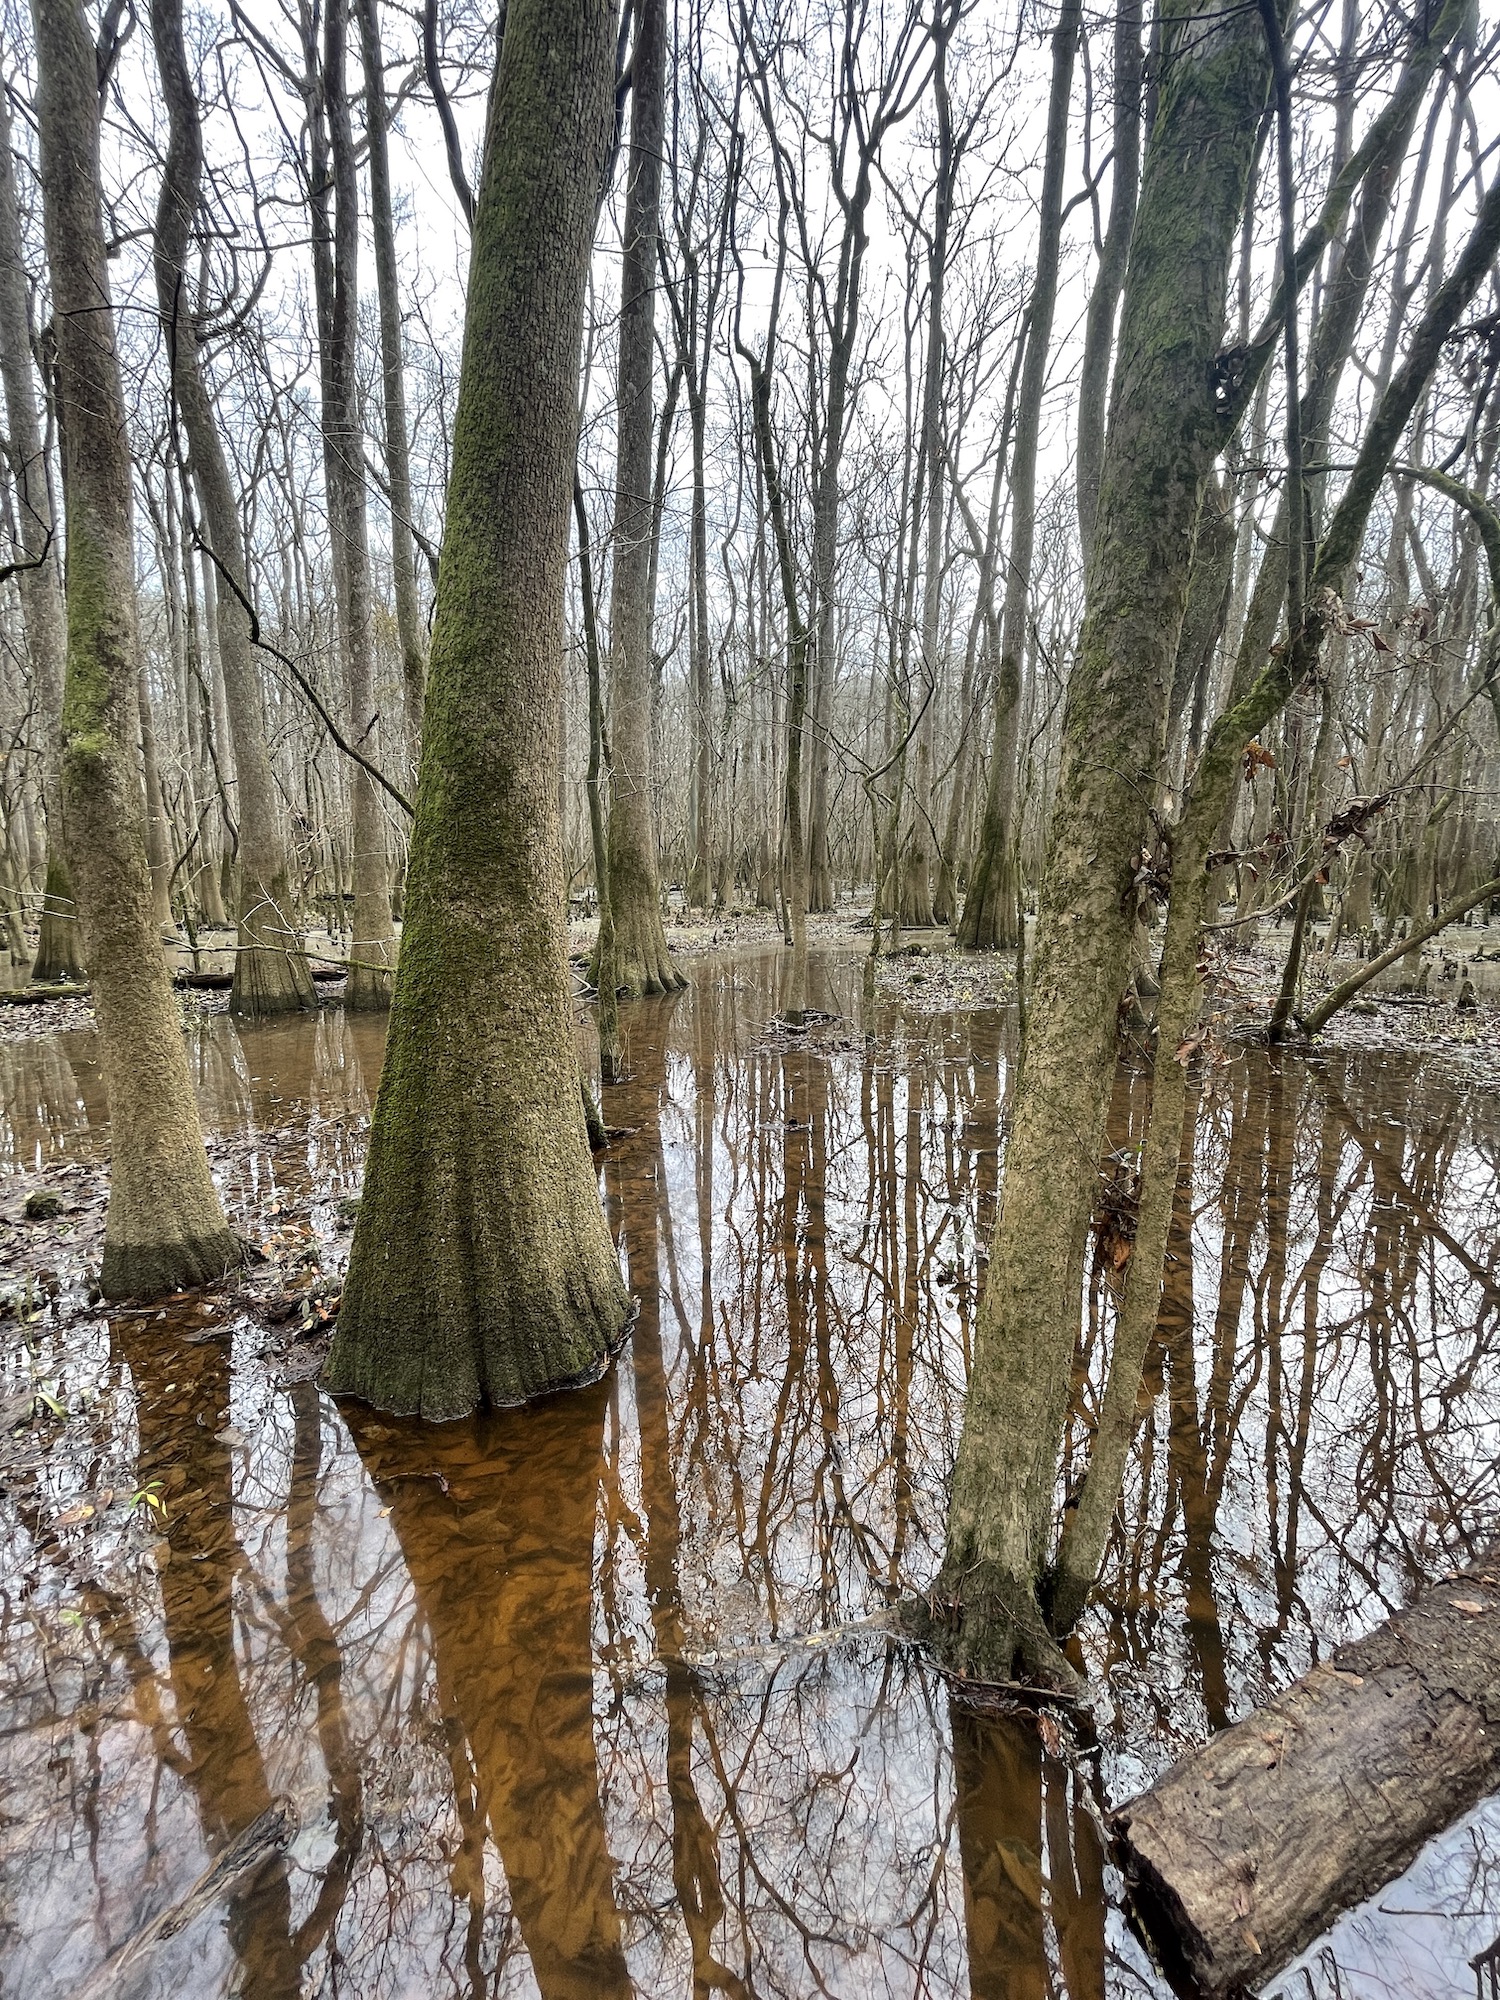 Trees in water in congaree foreset